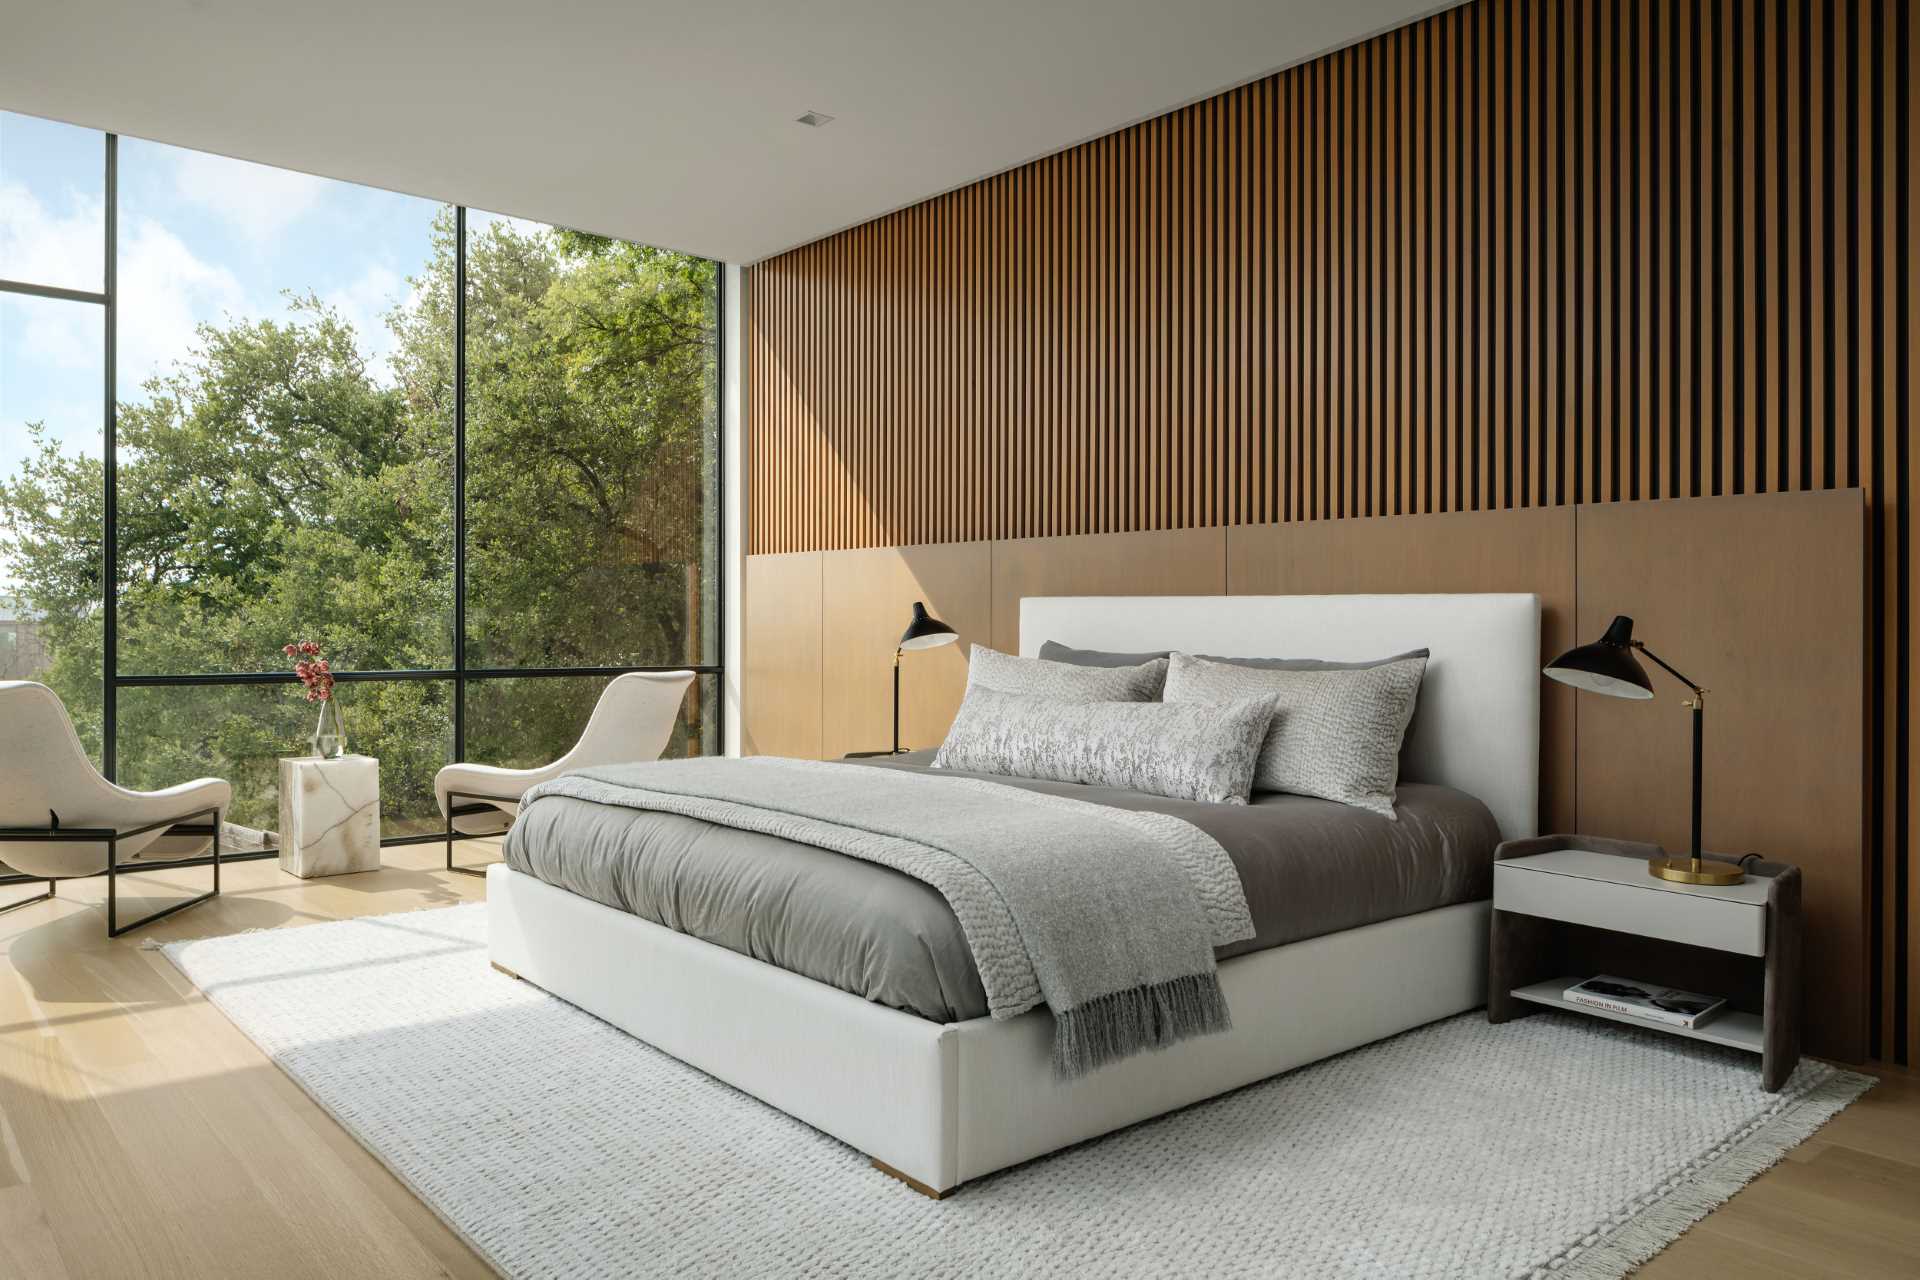 The primary suite is cantilevered above the sloping grade and is the closest part of the residence to the city, allowing the bedroom to essentially float among the treetops while hovering above the adjacent pool.